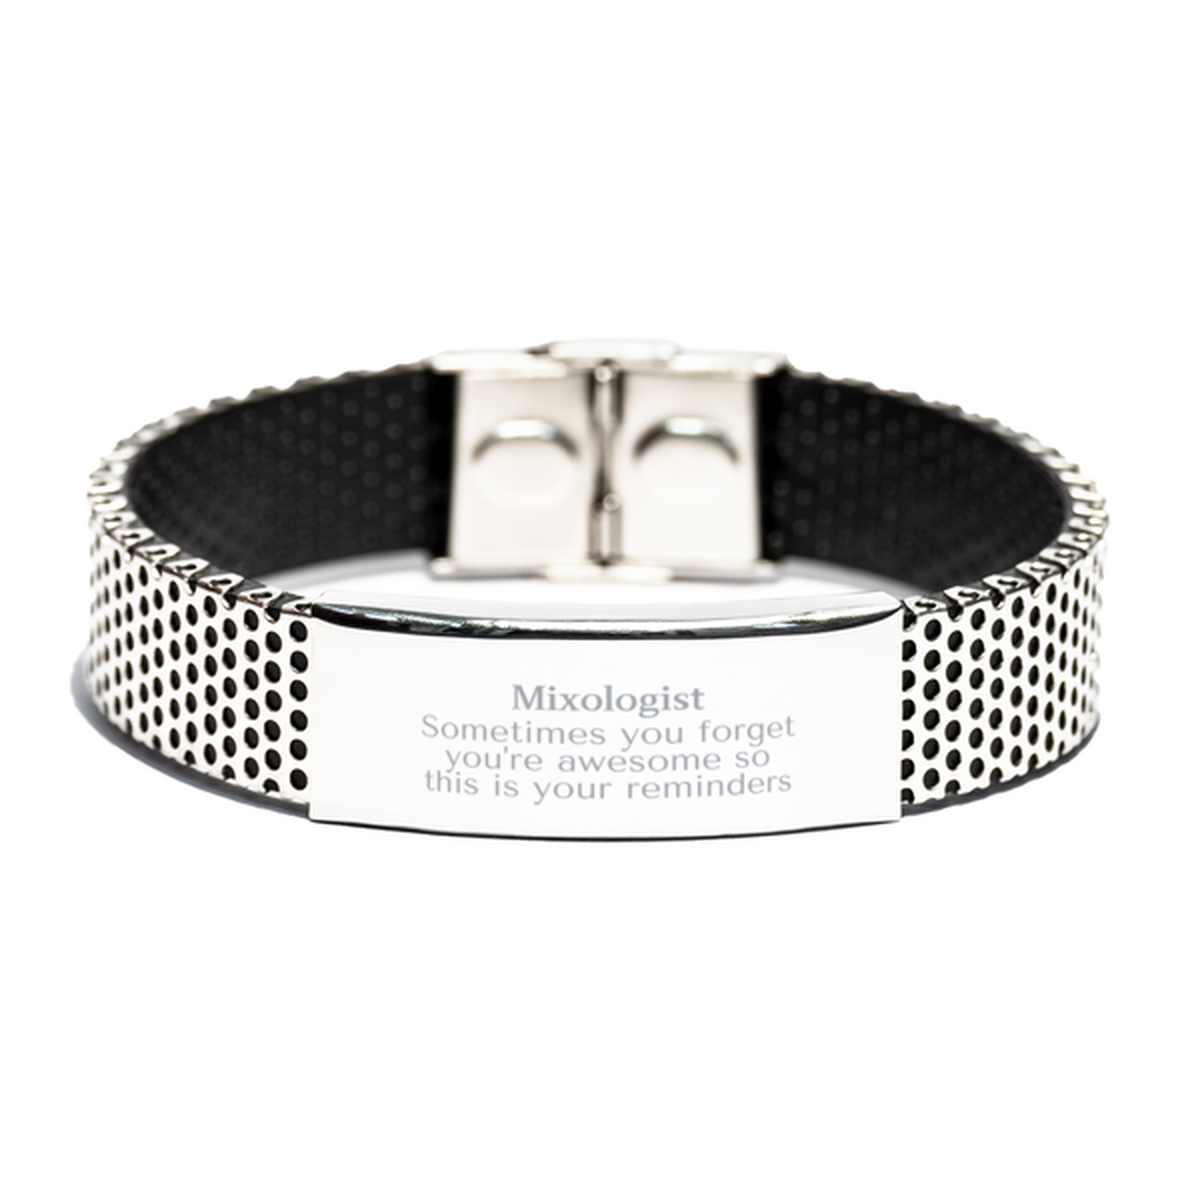 Sentimental Mixologist Stainless Steel Bracelet, Mixologist Sometimes you forget you're awesome so this is your reminders, Graduation Christmas Birthday Gifts for Mixologist, Men, Women, Coworkers